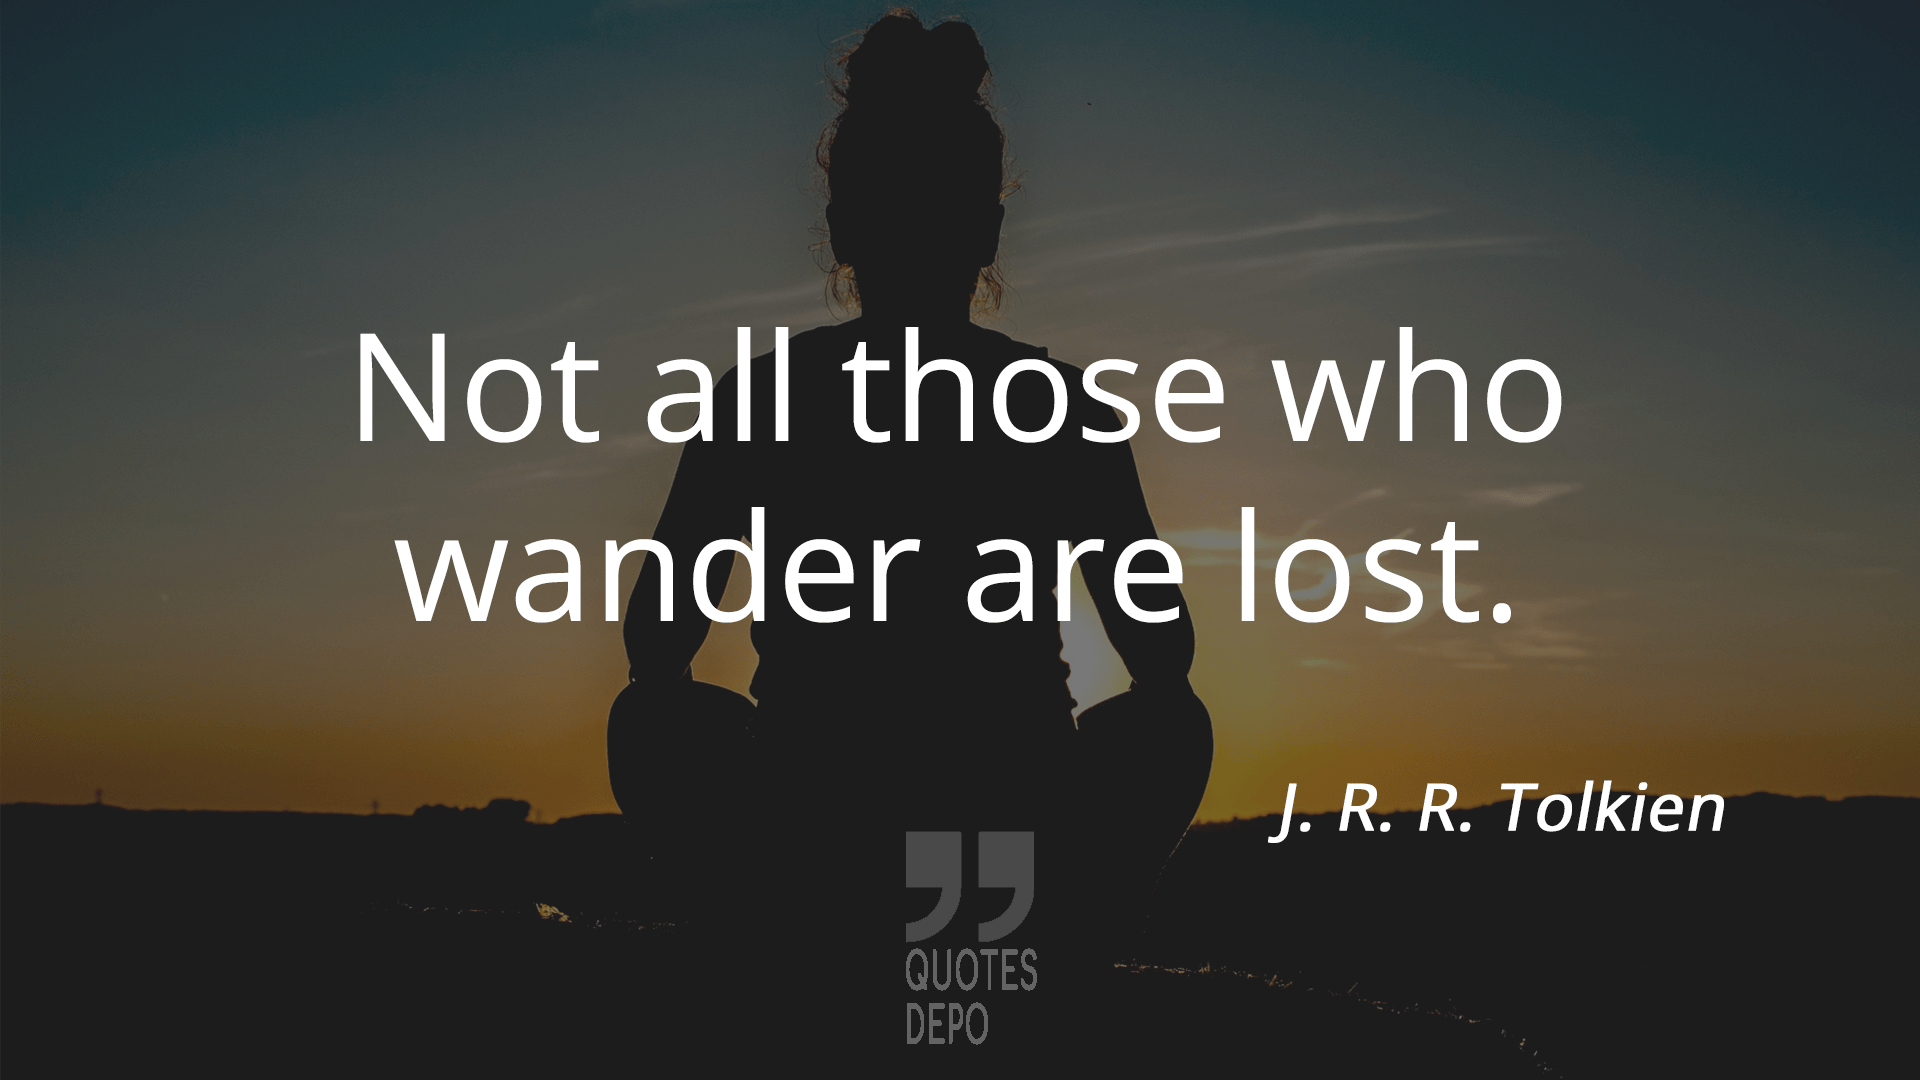 not all who wander are lost - j. r. r. tolkien quotes